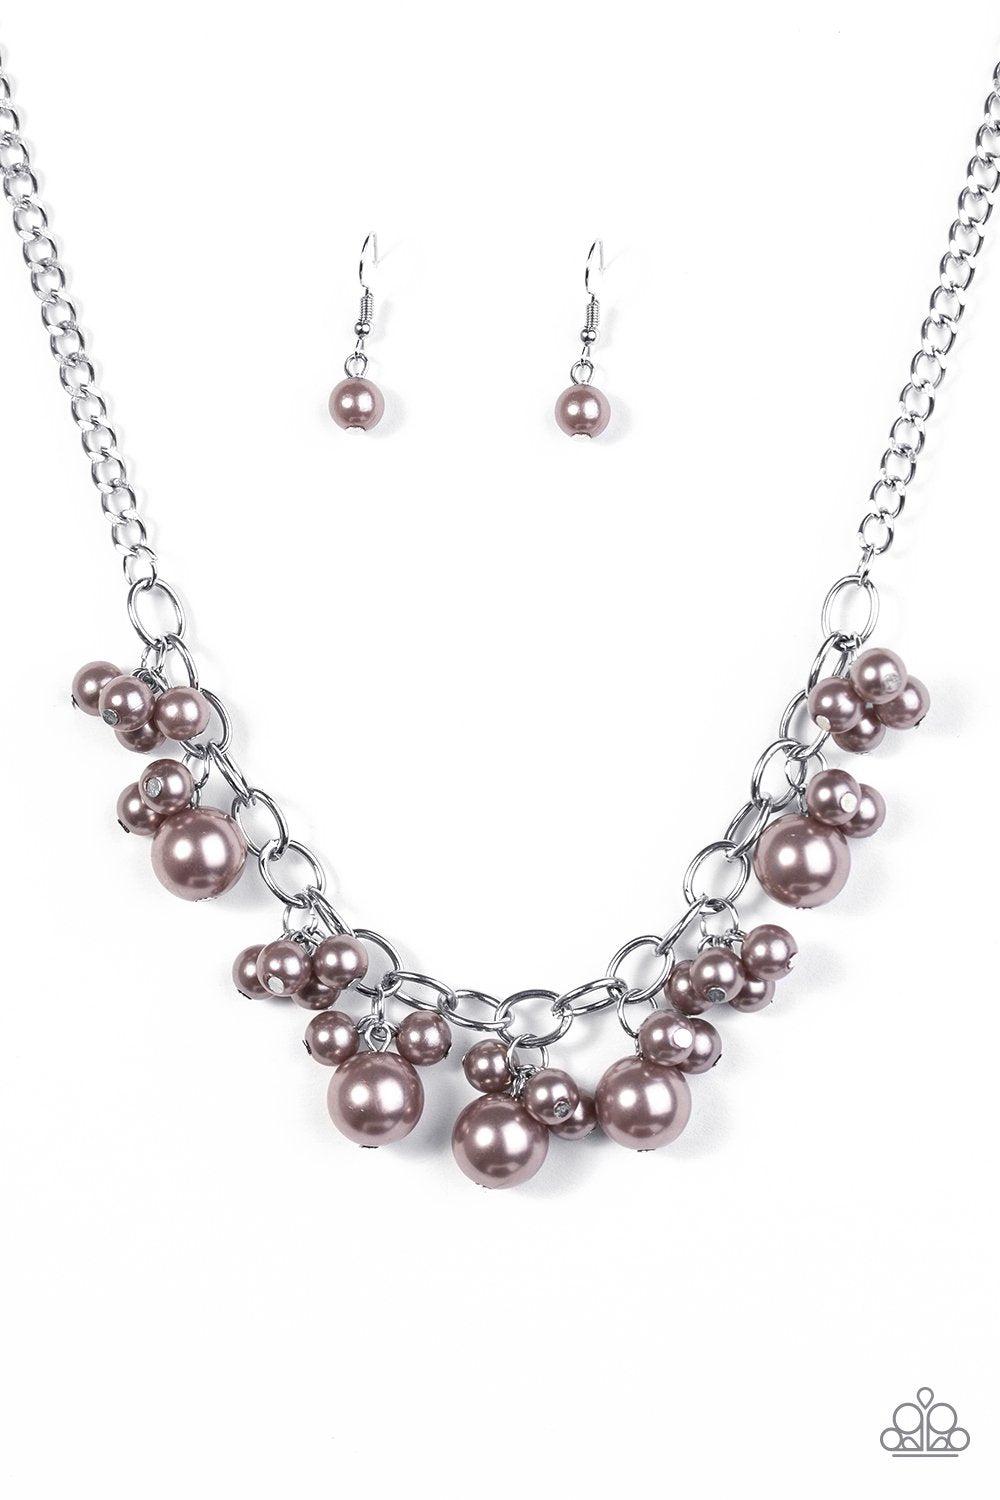 Celebrity Treatment Silver Pearl Necklace - Paparazzi Accessories-CarasShop.com - $5 Jewelry by Cara Jewels